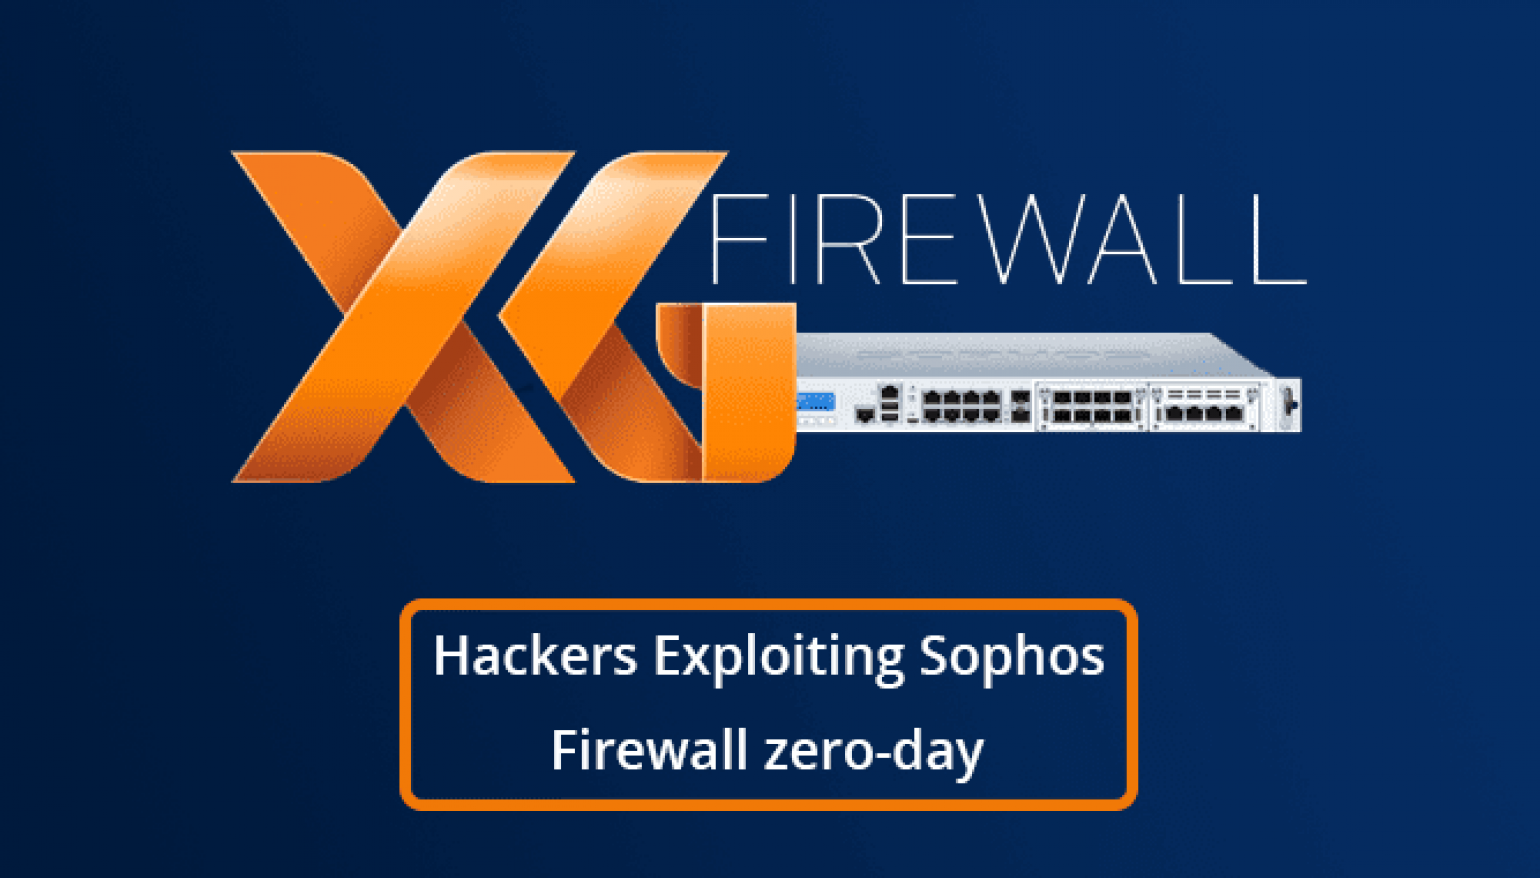 Hackers Exploit Sql Injection And Code Execution Zero Day Bugs In Sophos 